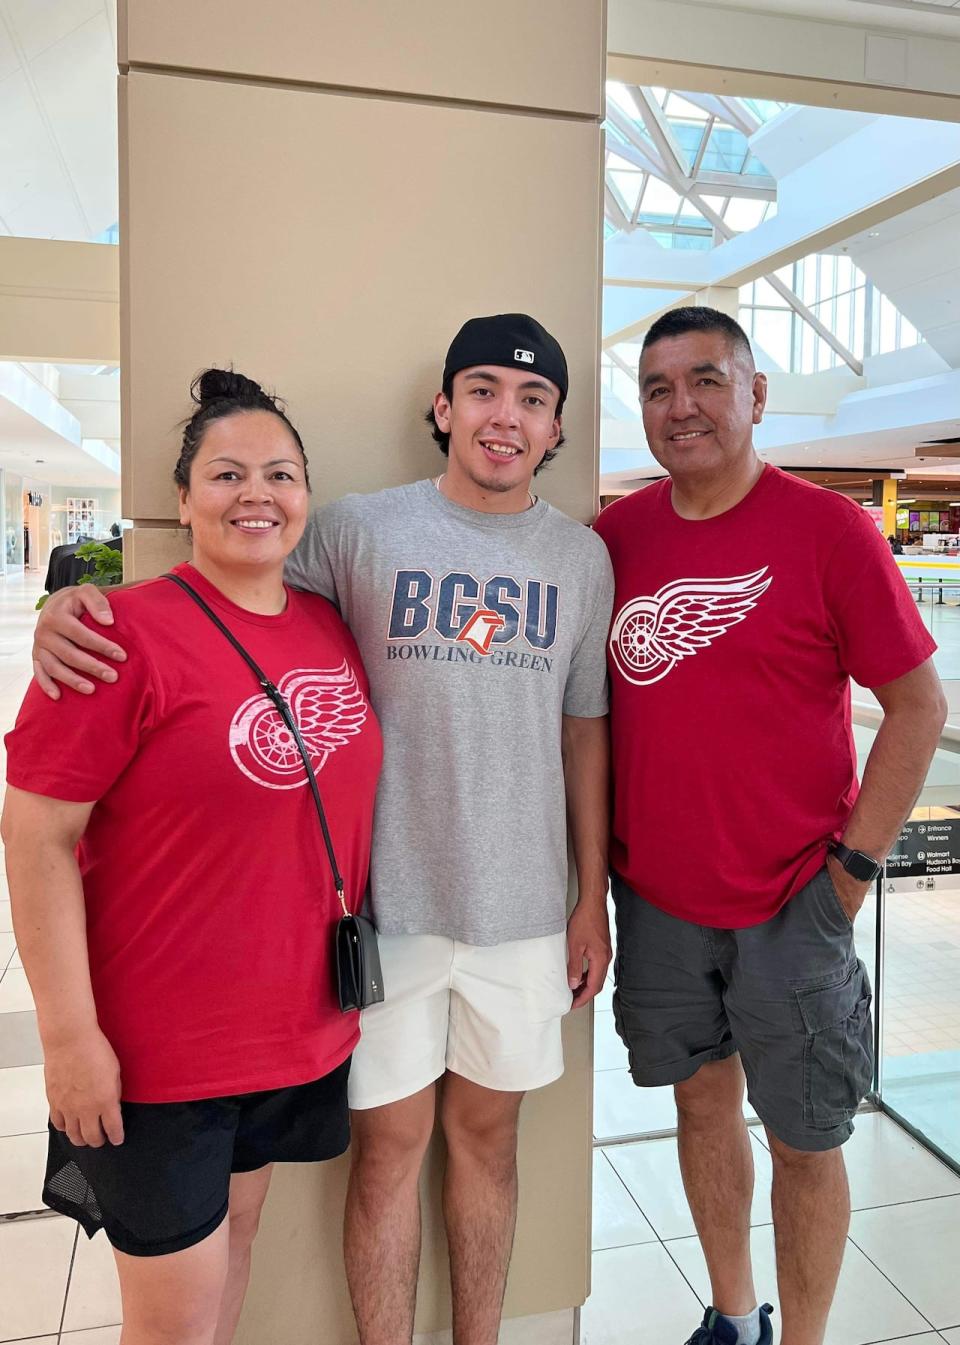 Israel Mianscum, centre, stands with parents Tiffany and Louie, while attending a development camp earlier this summer with the Detroit Red Wings. The 20-year-old has been invited to attend this year's NHL Prospects Tournament and the Red Wings' development camp in Sept.